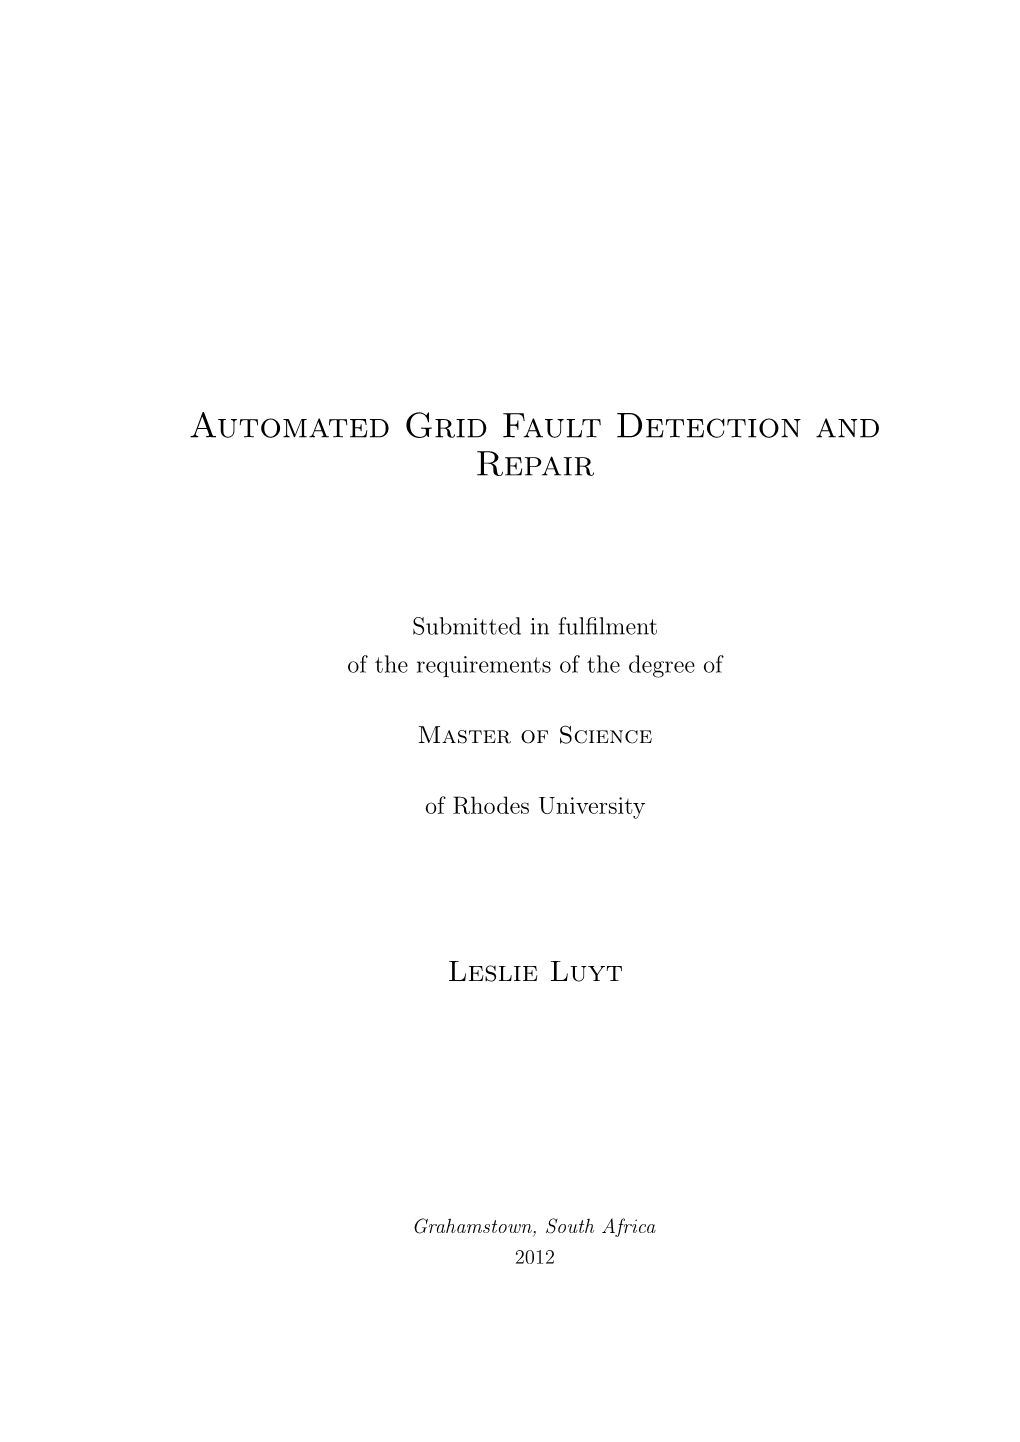 Automated Grid Fault Detection and Repair